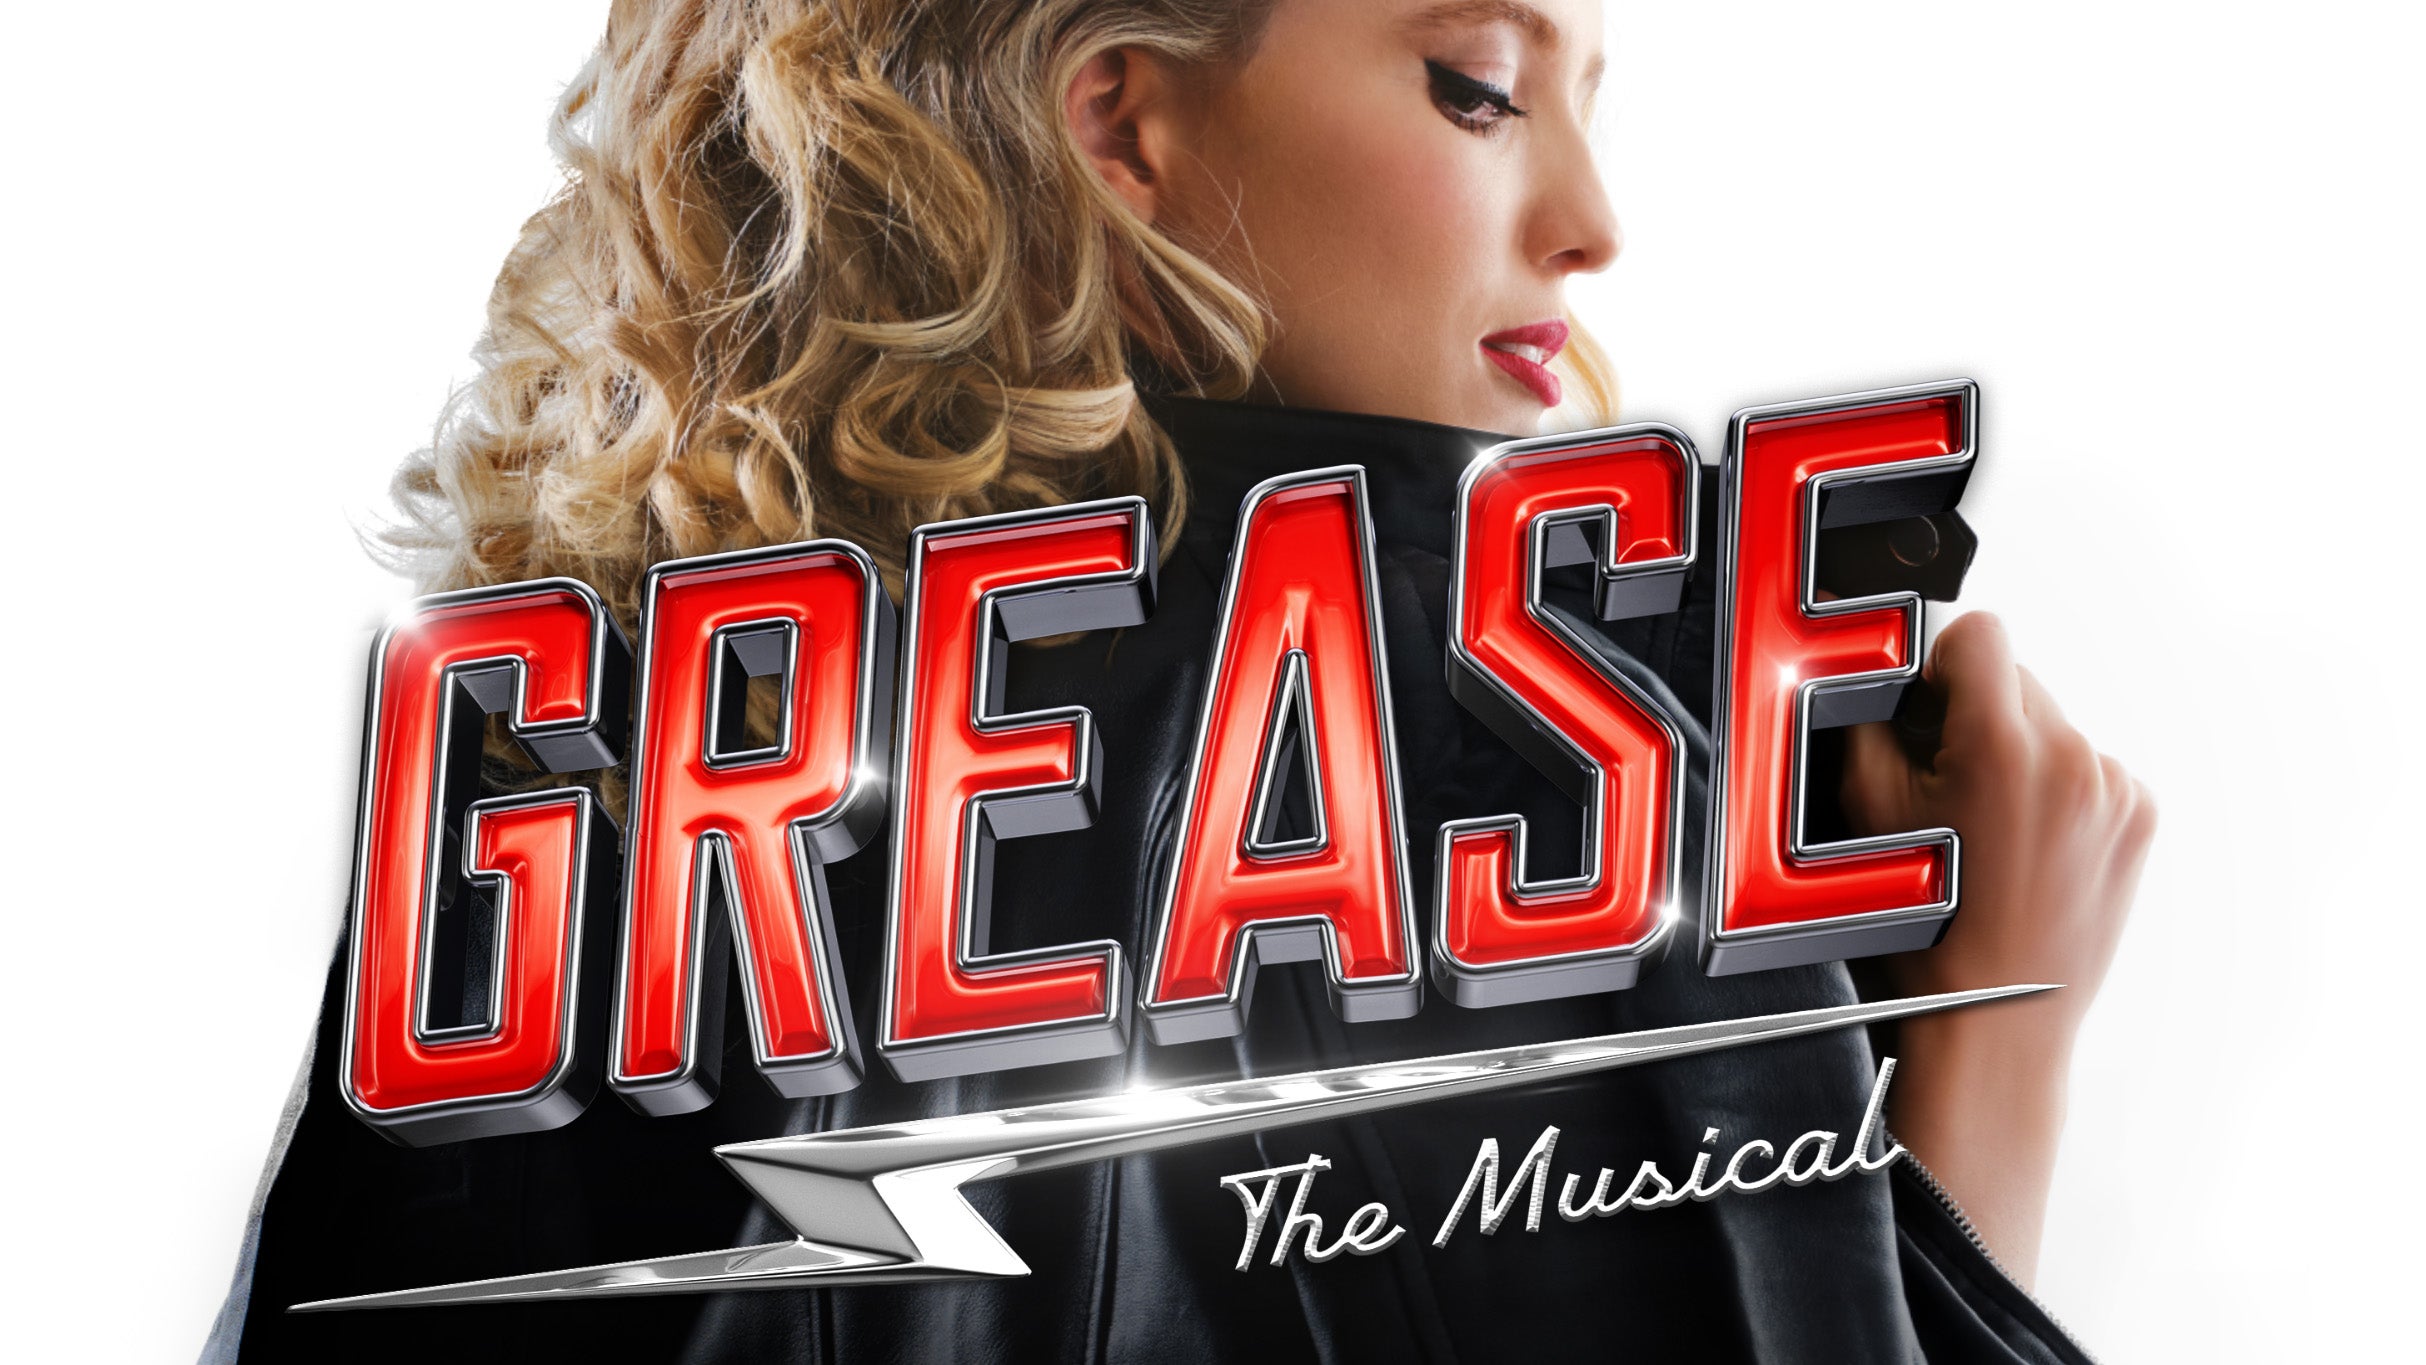 Grease - Auslan Interpreted Performance in Burswood promo photo for Exclusive presale offer code